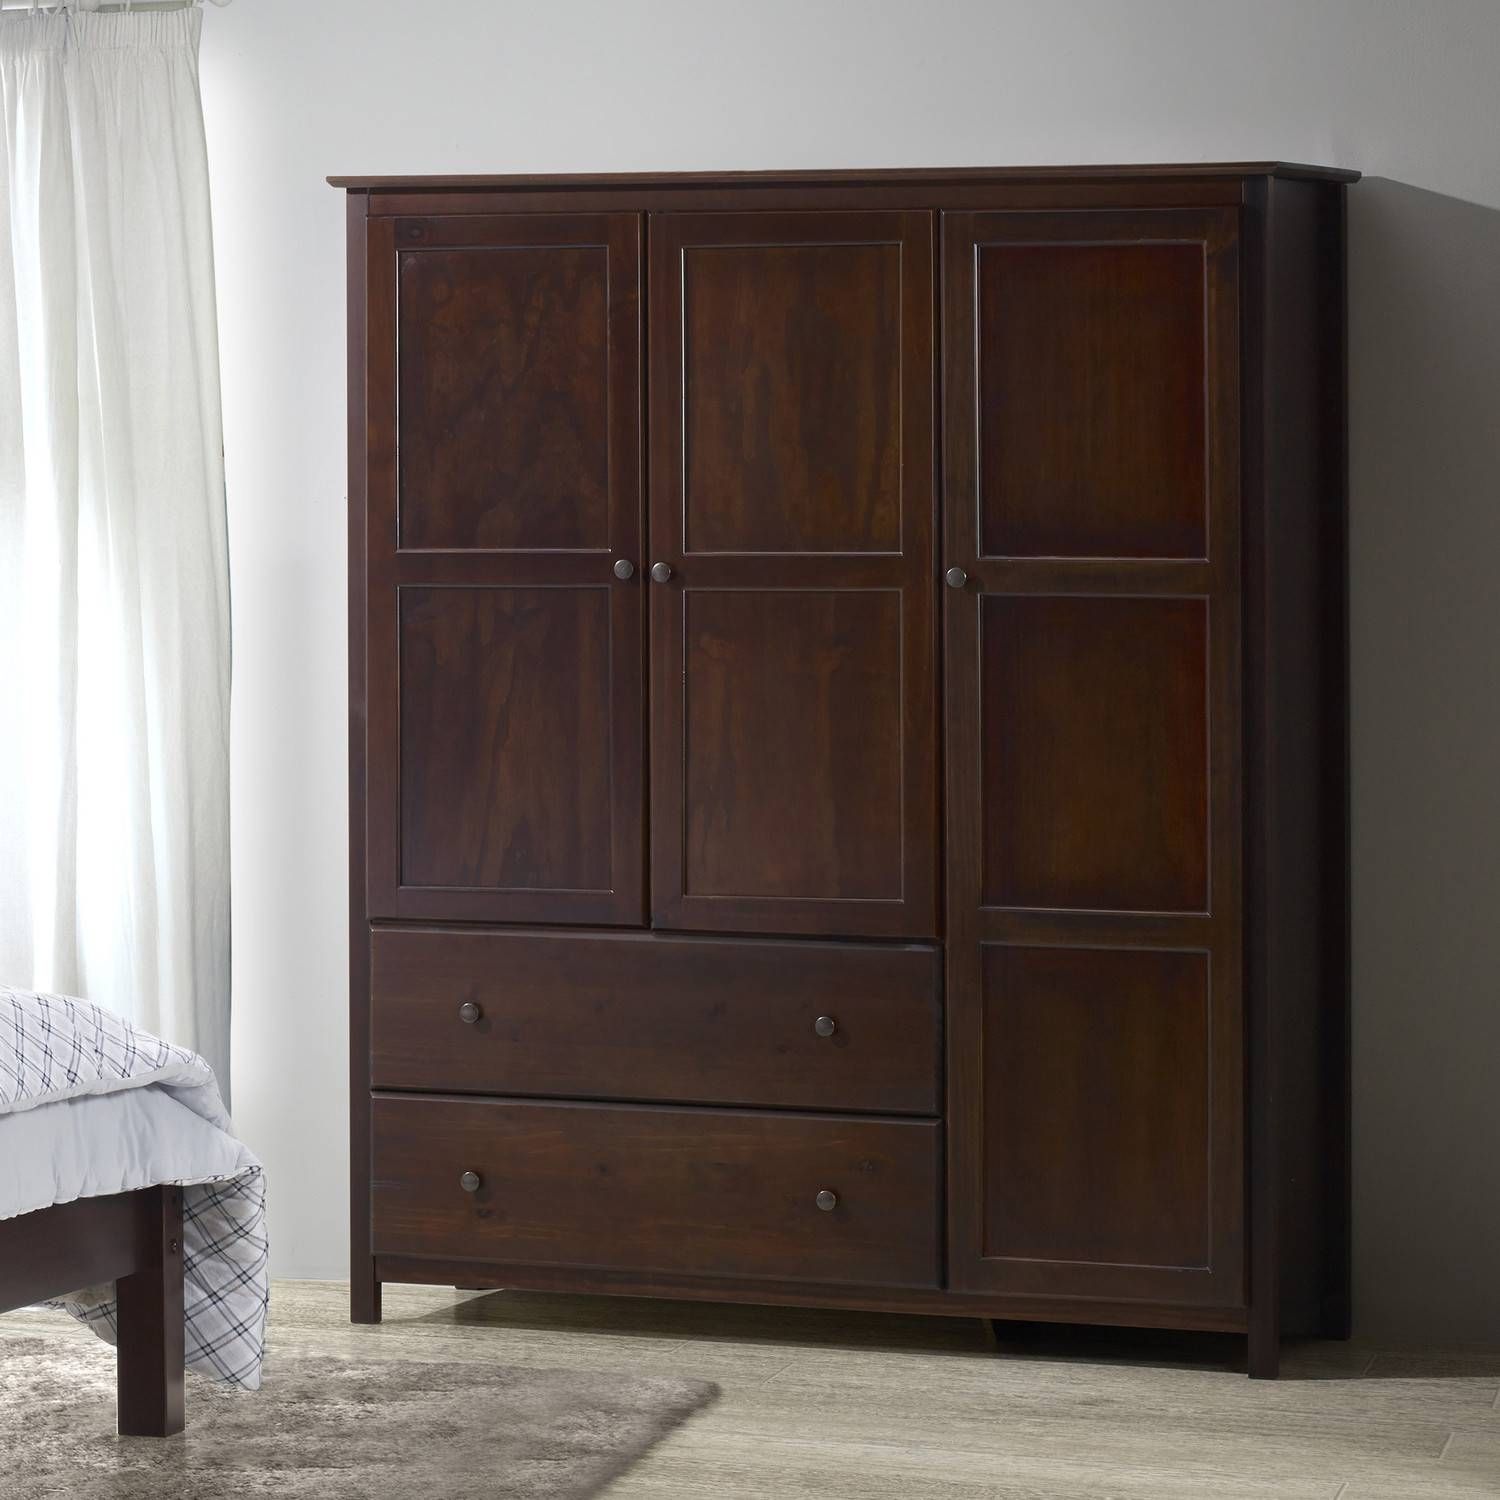 Furniture: Fancy Wardrobe Armoire For Wardrobe Organizer Idea Intended For Black Wood Wardrobes (Photo 9 of 15)